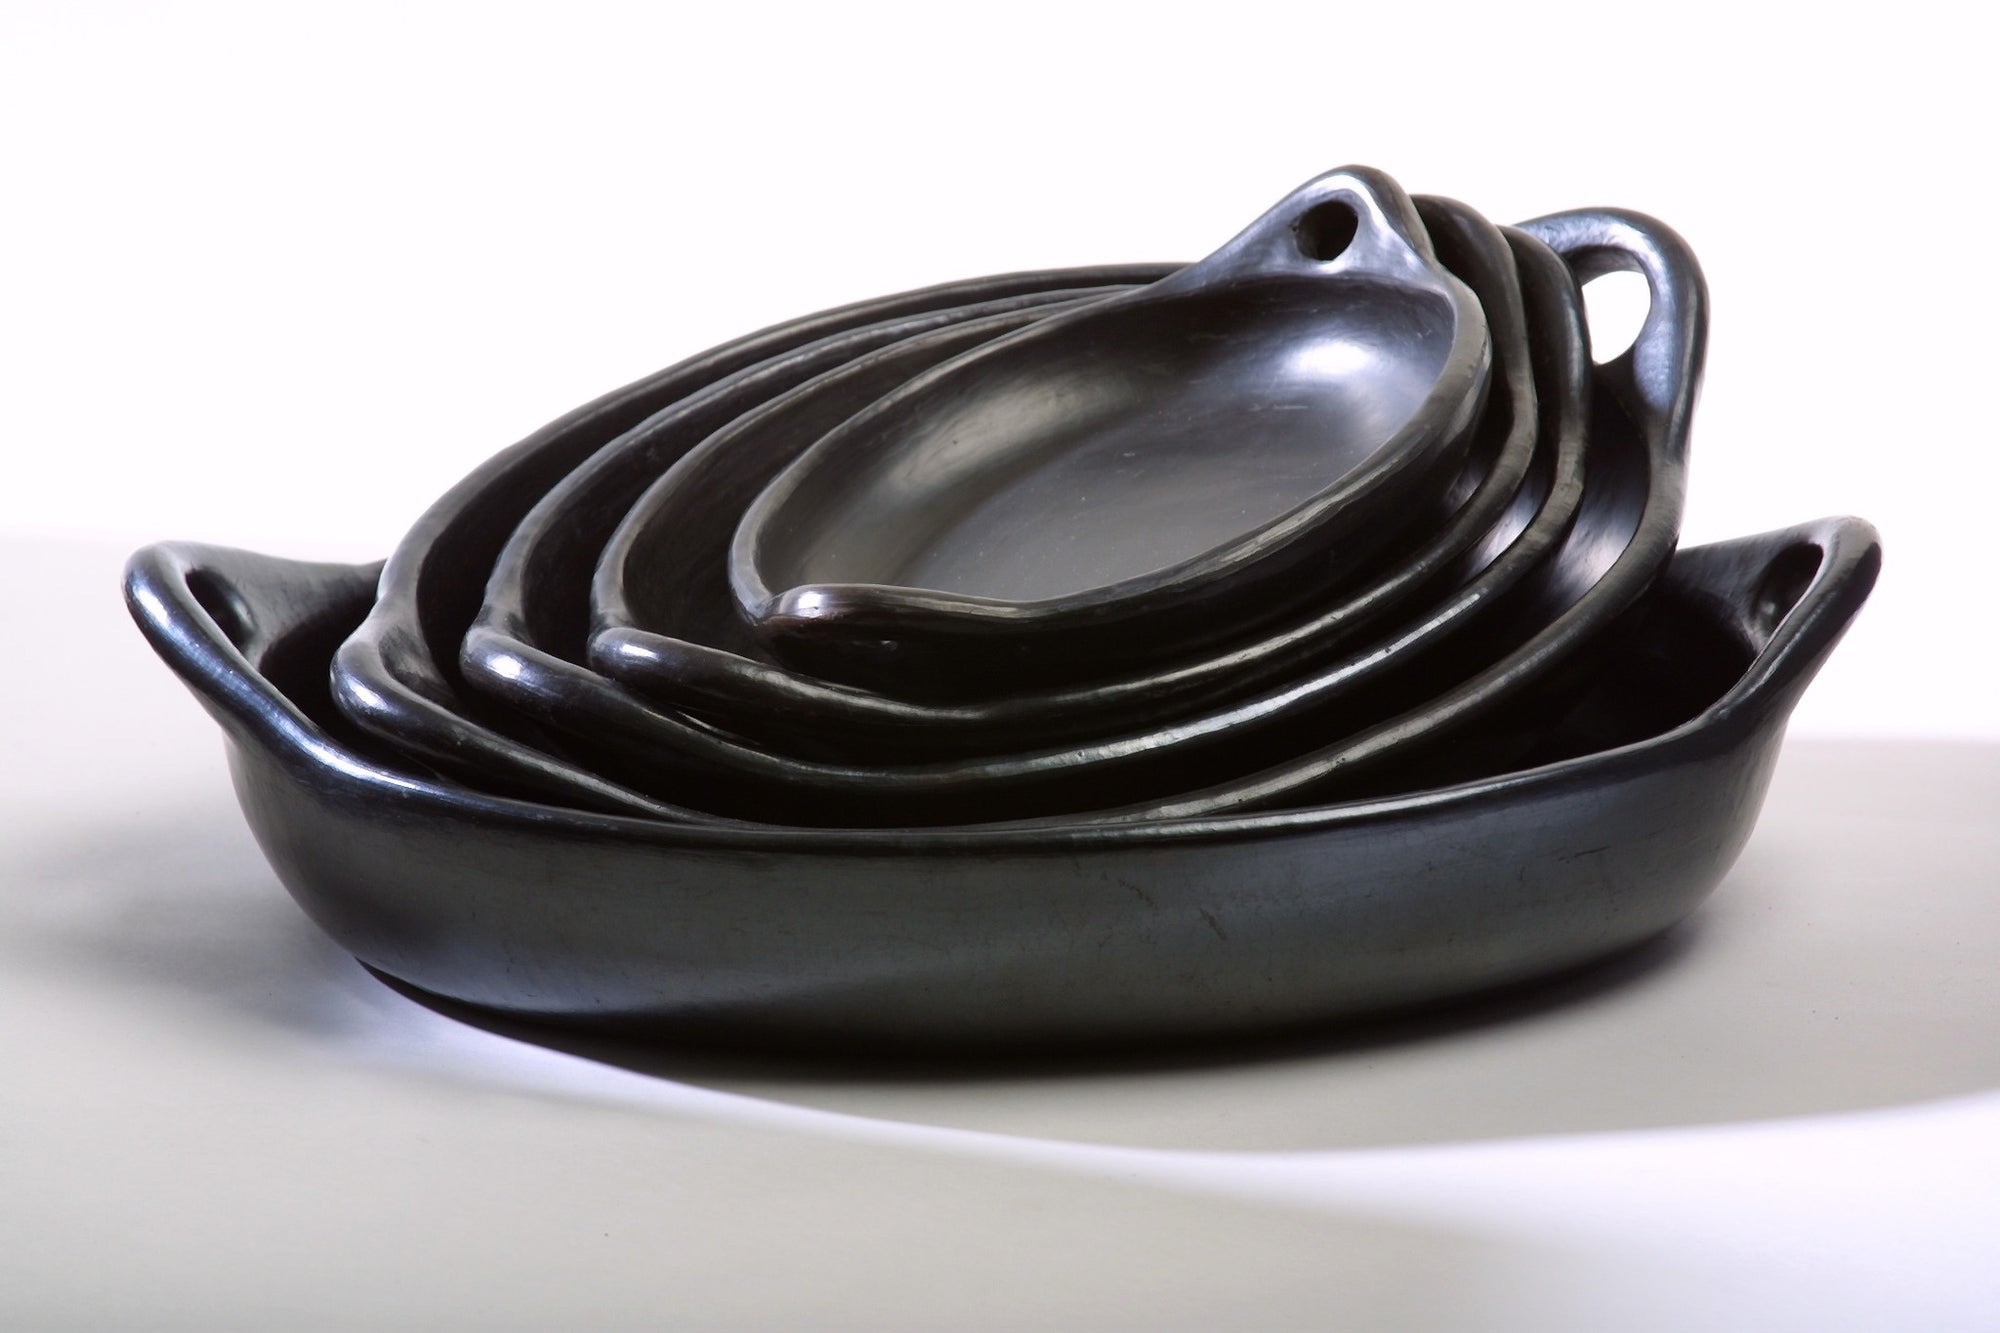 Chamba Oval Platters (PL1-PL6) - MyToque - 1